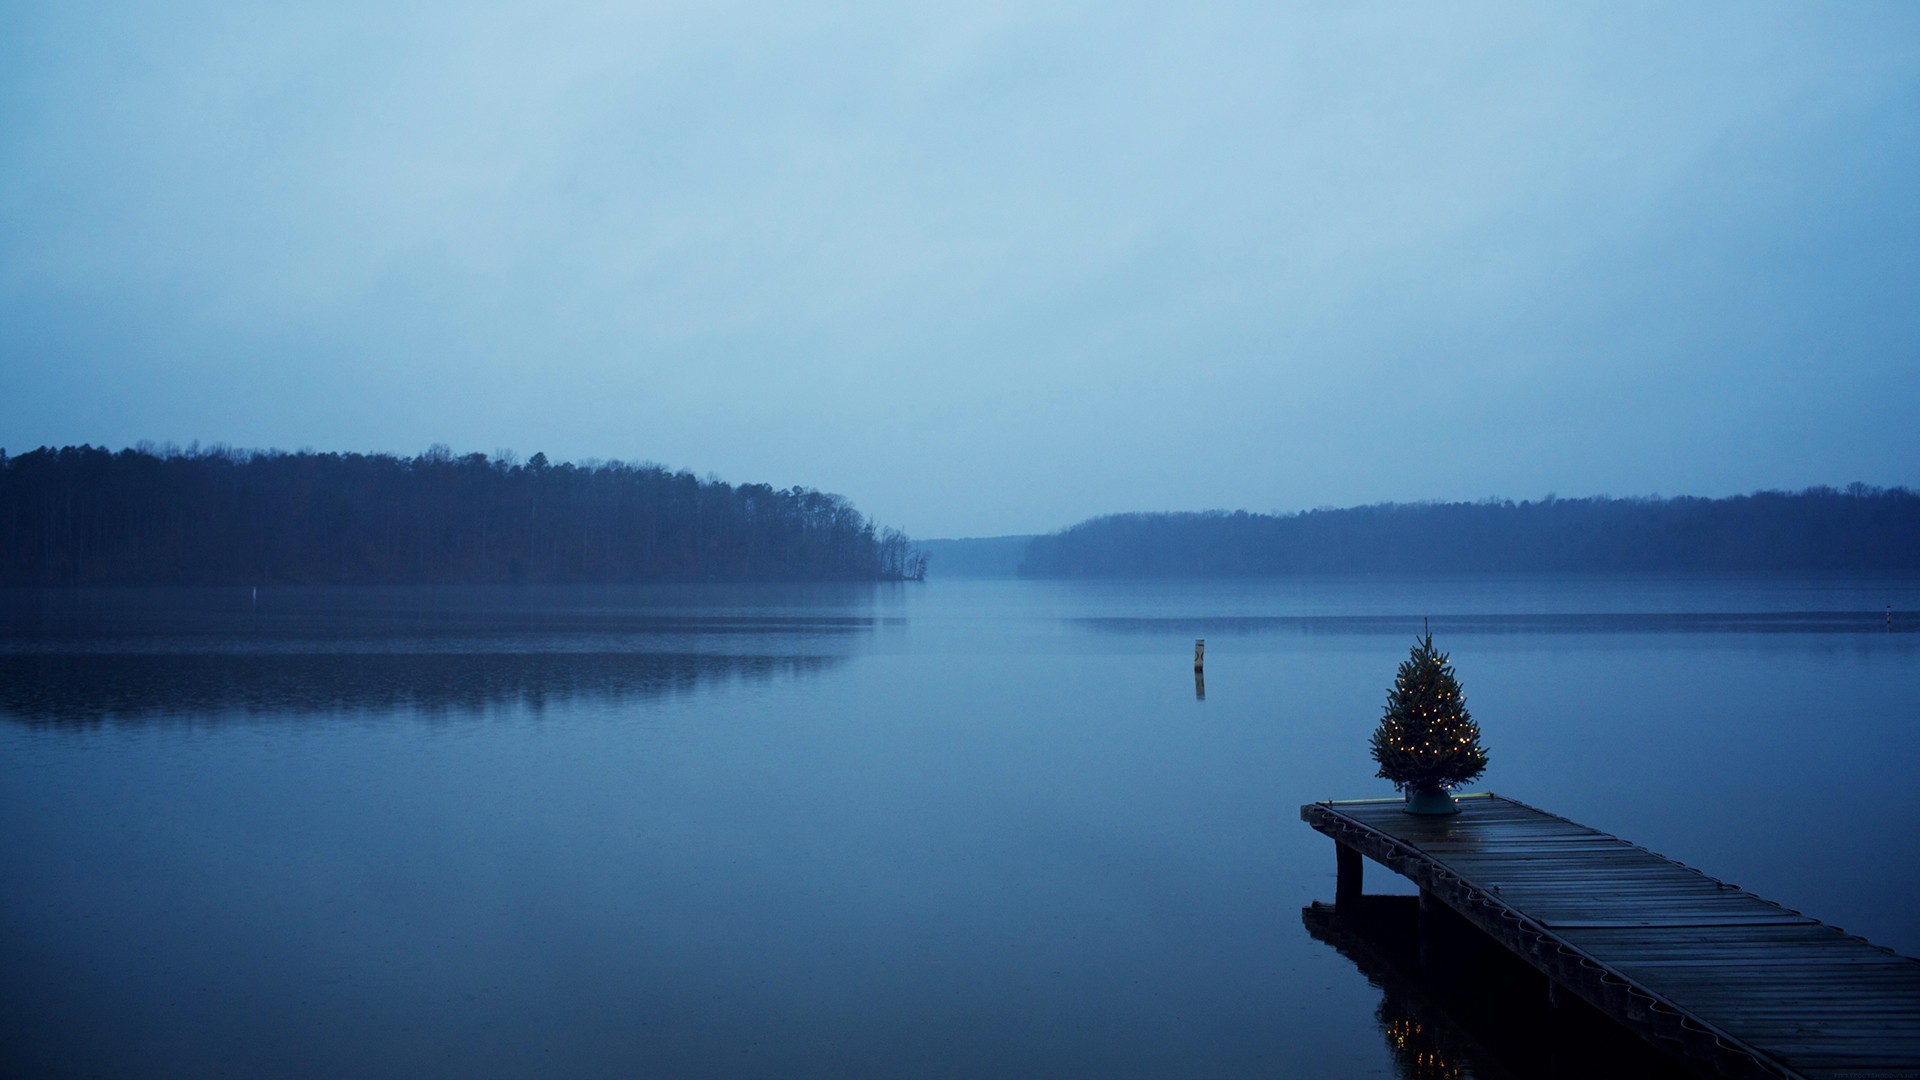 General 1920x1080 landscape water nature pier blue calm calm waters lake overcast mist Christmas tree Christmas Christmas lights